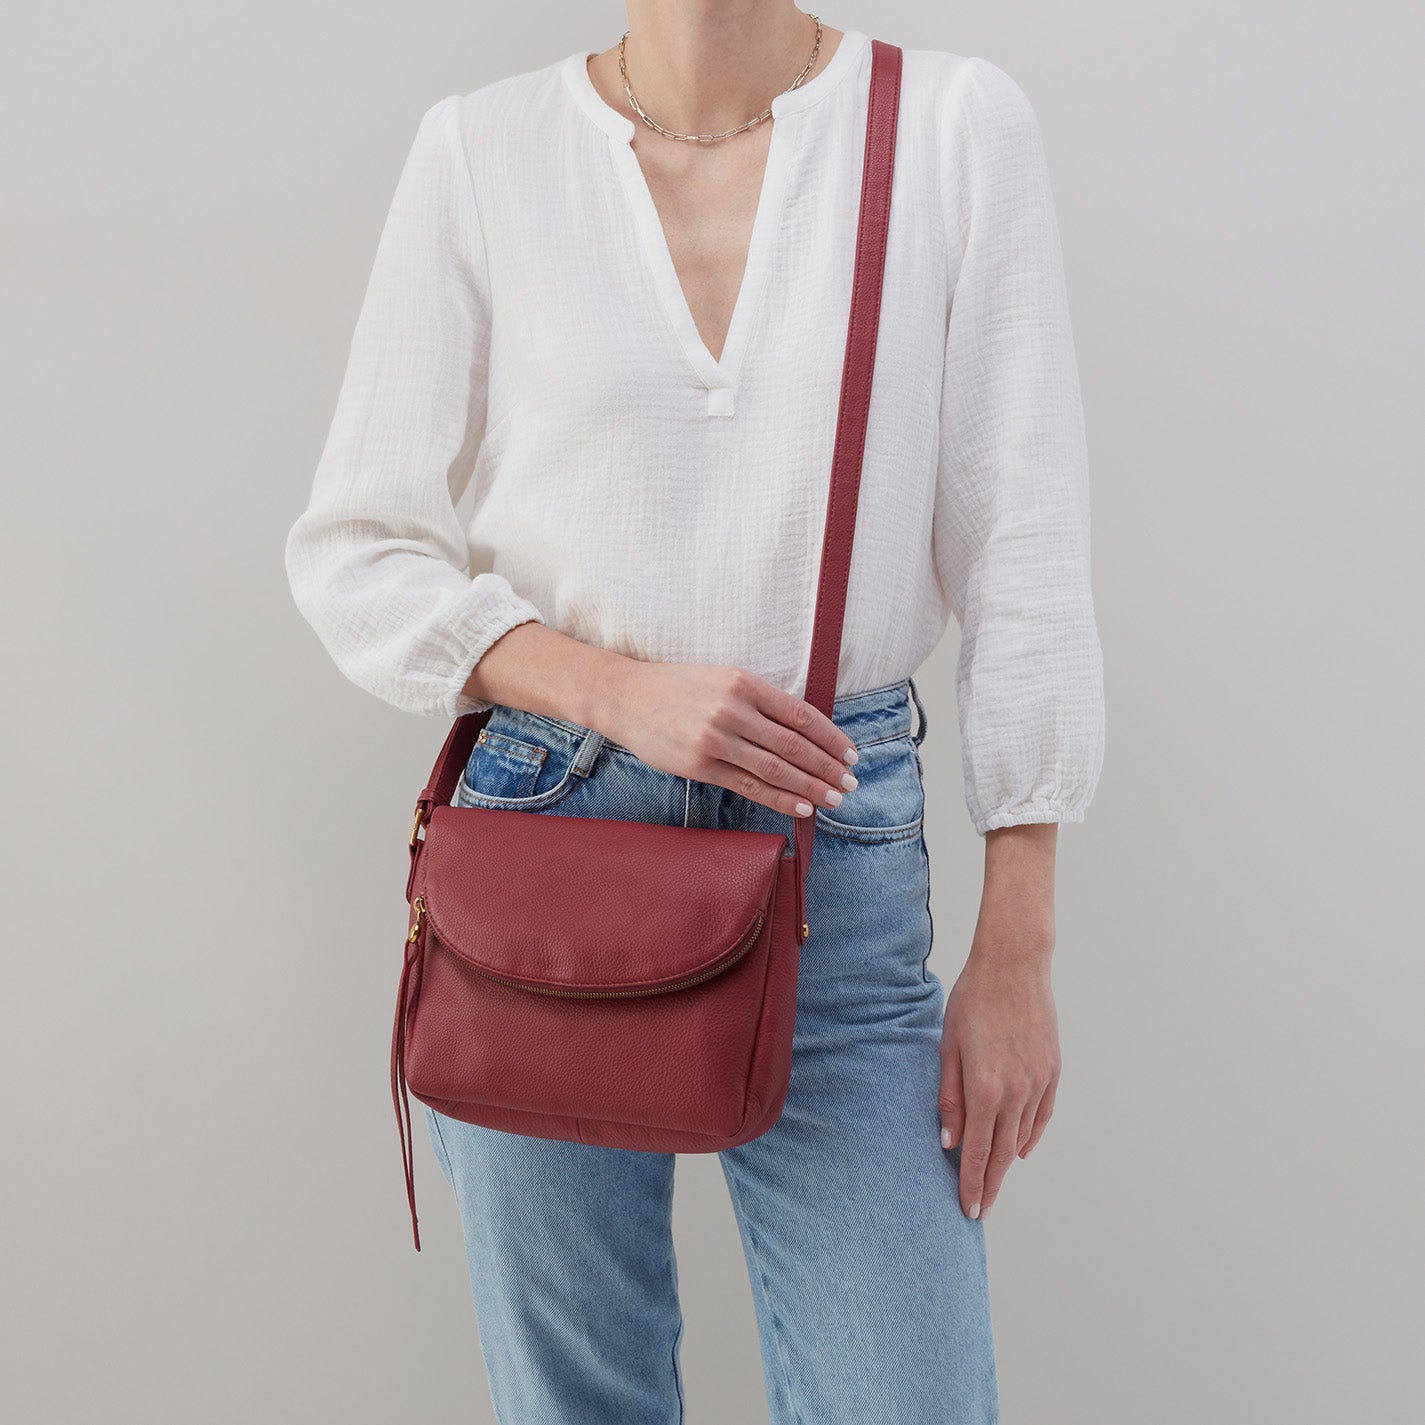 Fern Messenger Crossbody in Pebbled Leather - Red Pear